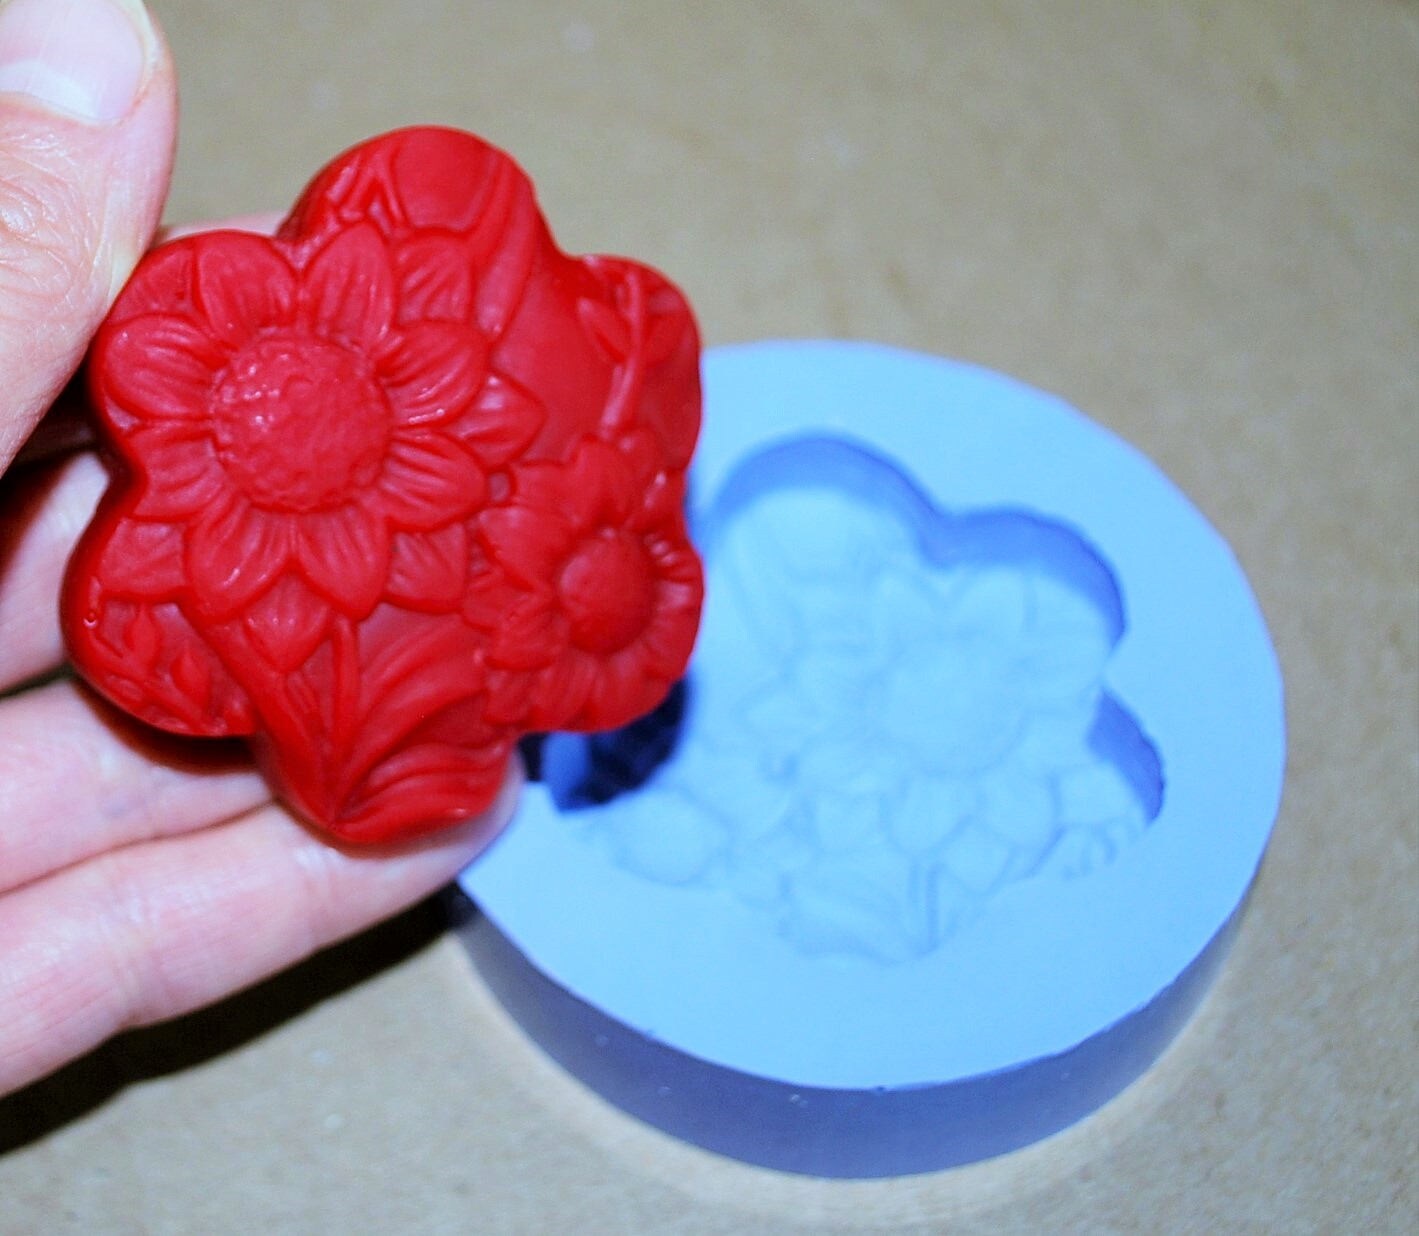 Silicone Mold - silicone flower mold - handmade mold - flower soap mold - handmade soap mold - Polymer Clay Resin